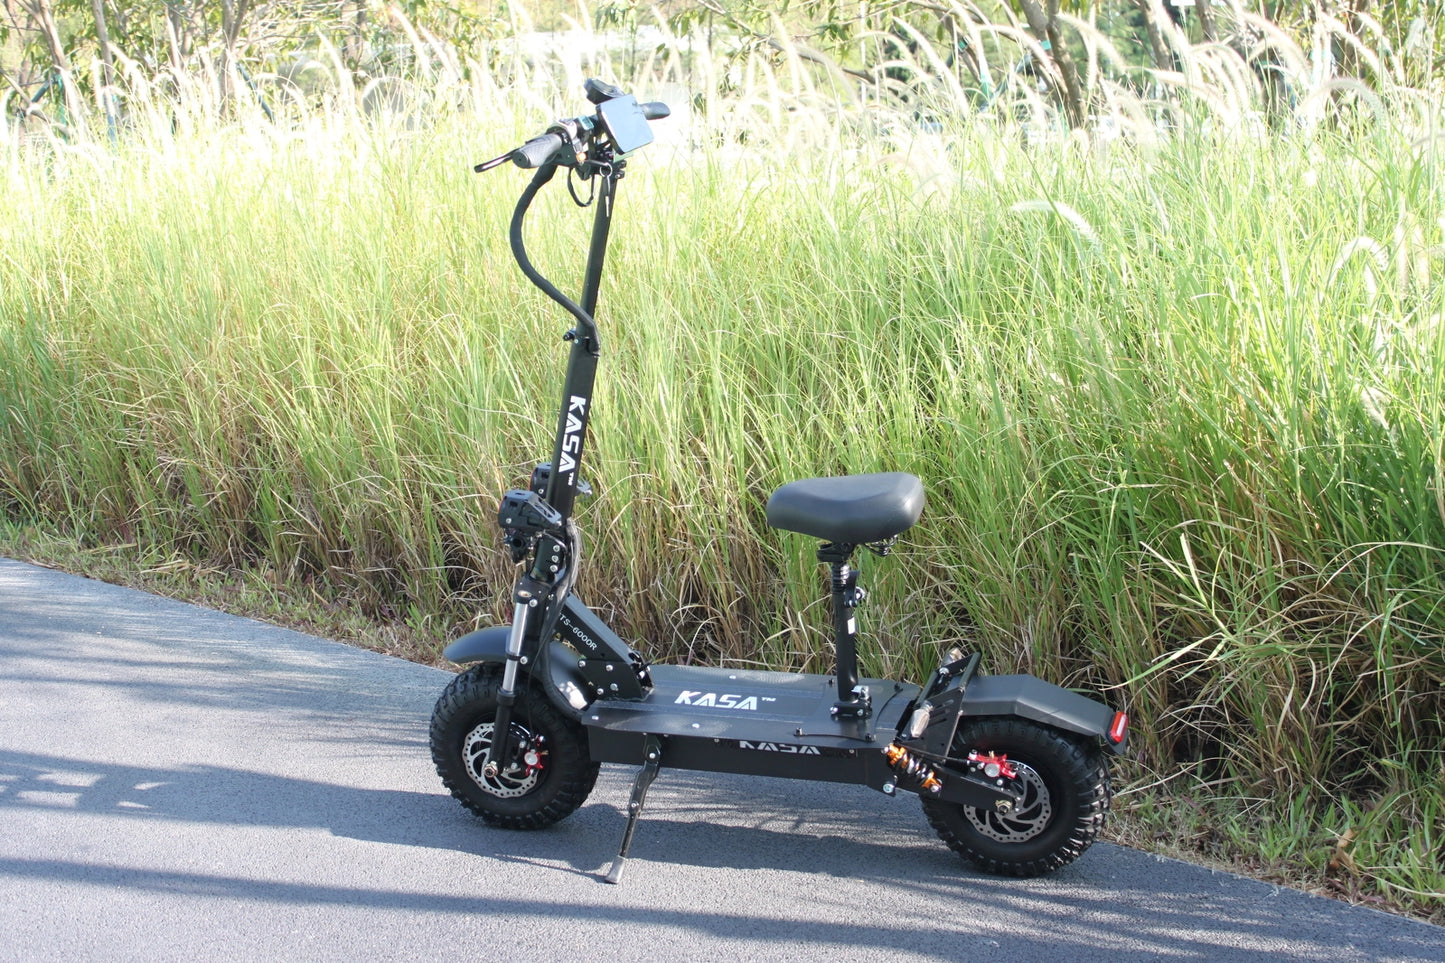 KASA GTS6000R Electric Scooter 6000W Motor 14inch Off Road Tyre Foldable E-Scooter